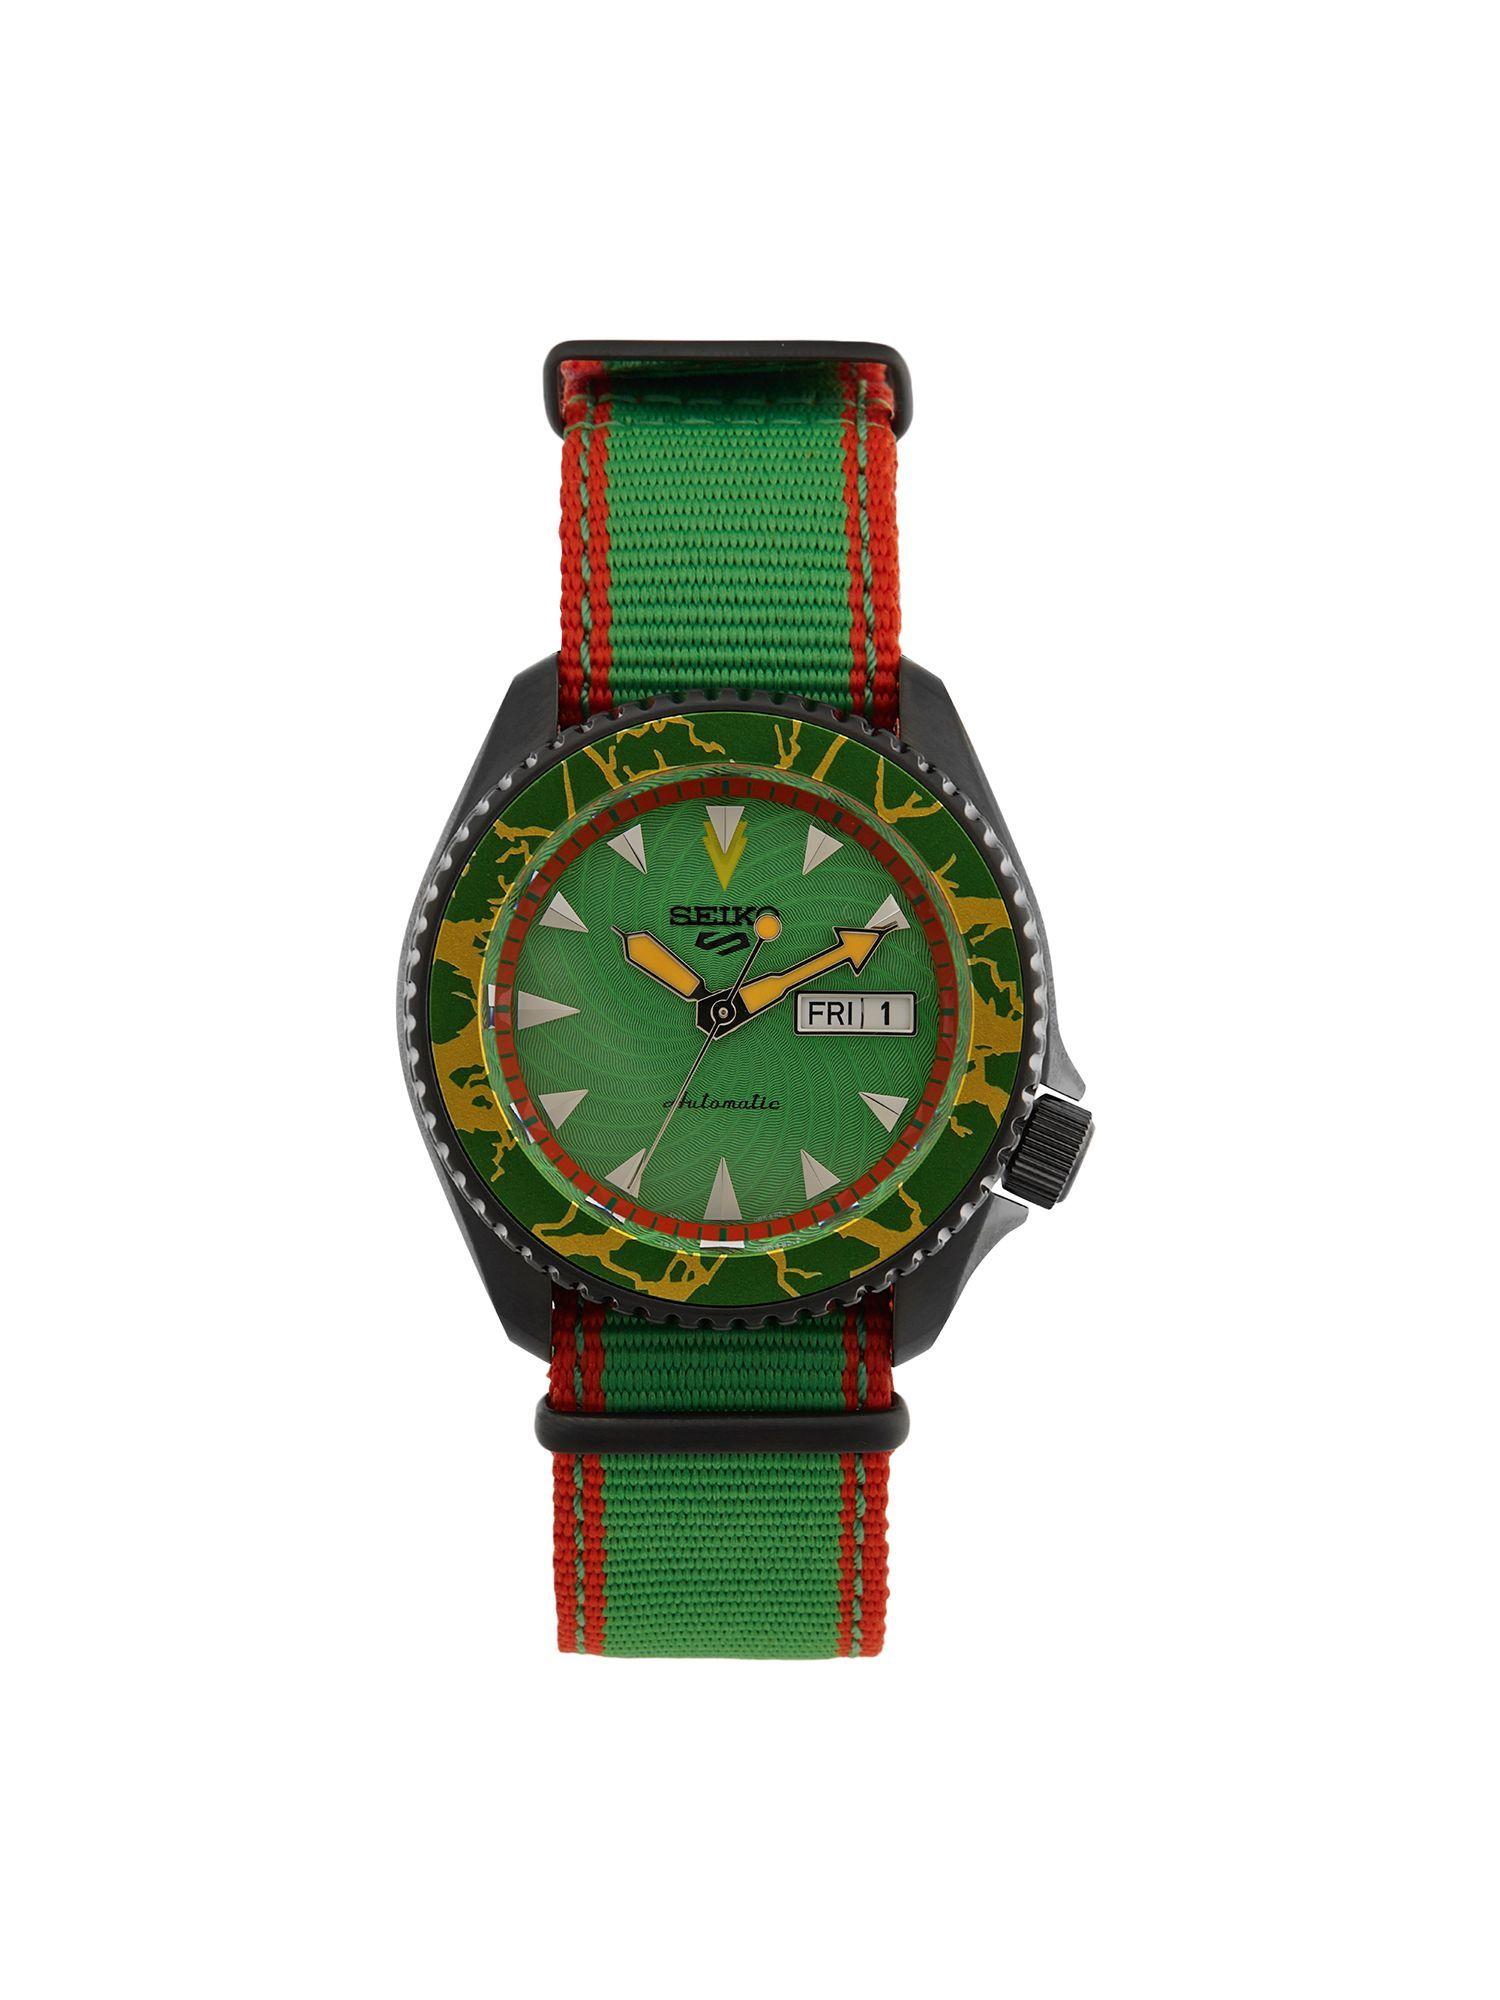 5 sports street fighter blanka limited edition automatic 100m mens watch